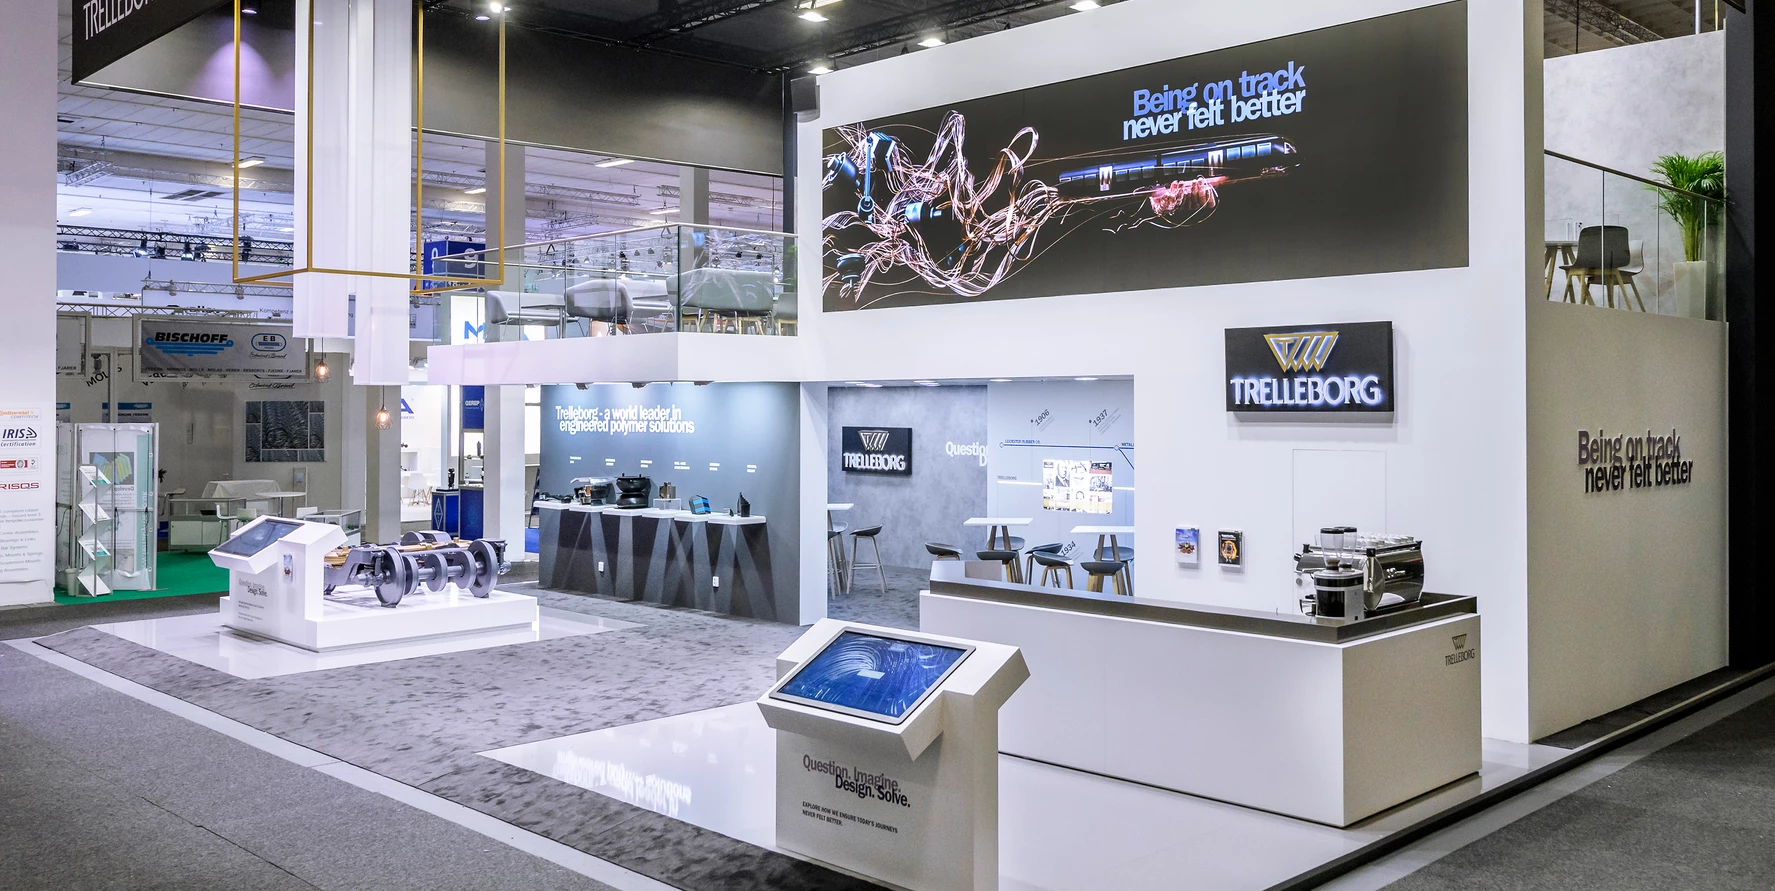 Trelleborg exhibition booth by SYMA